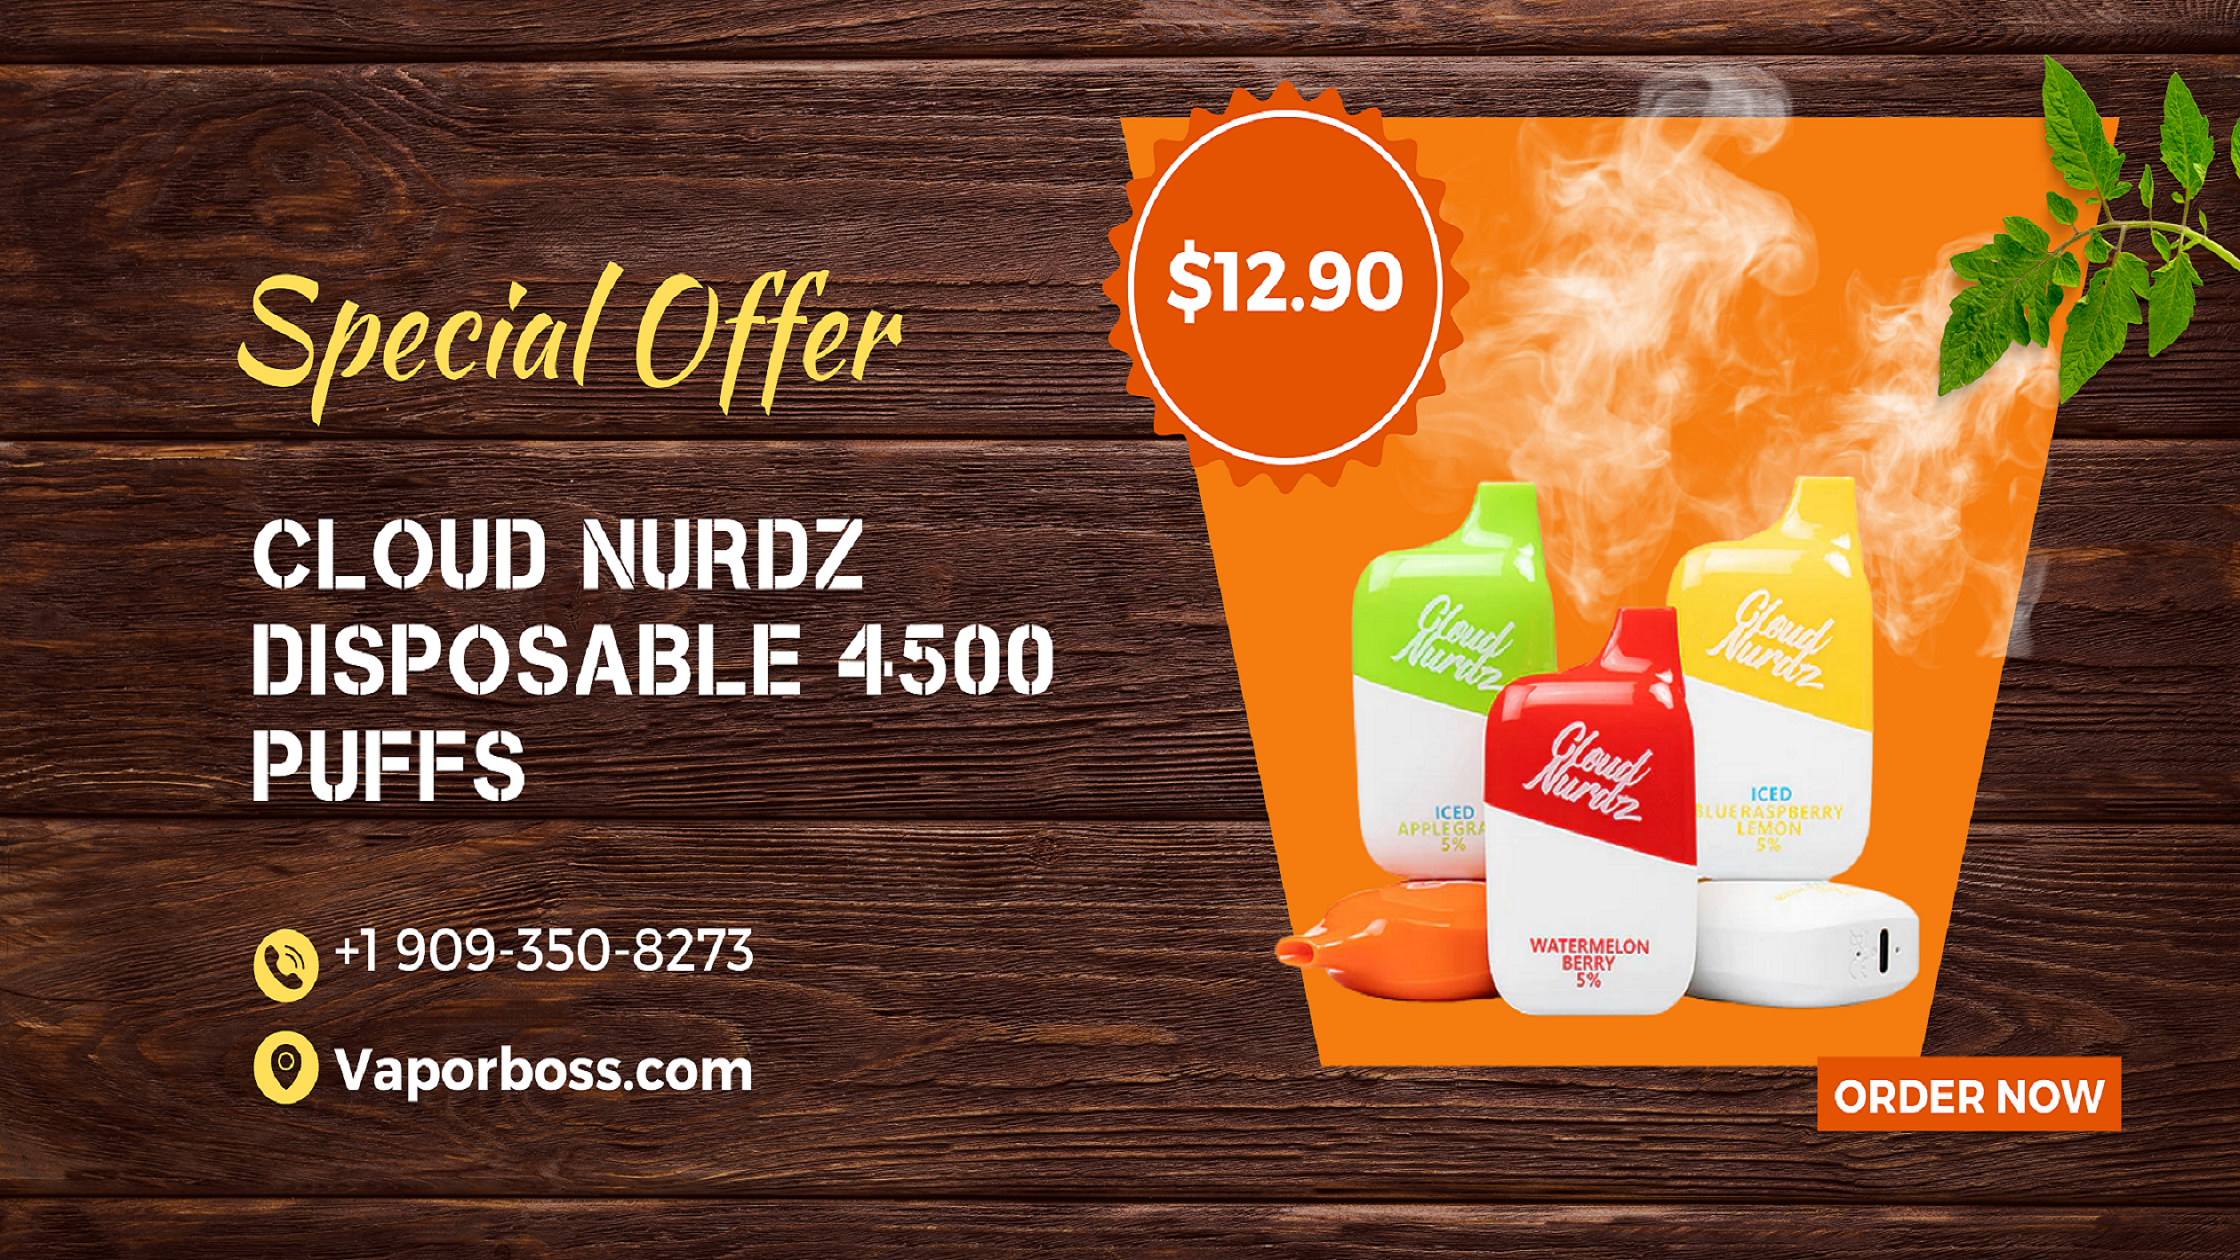 Cloud Nurdz Disposable 4500 Puffs: Unveiling an Epic Vaping Experience at $12.90